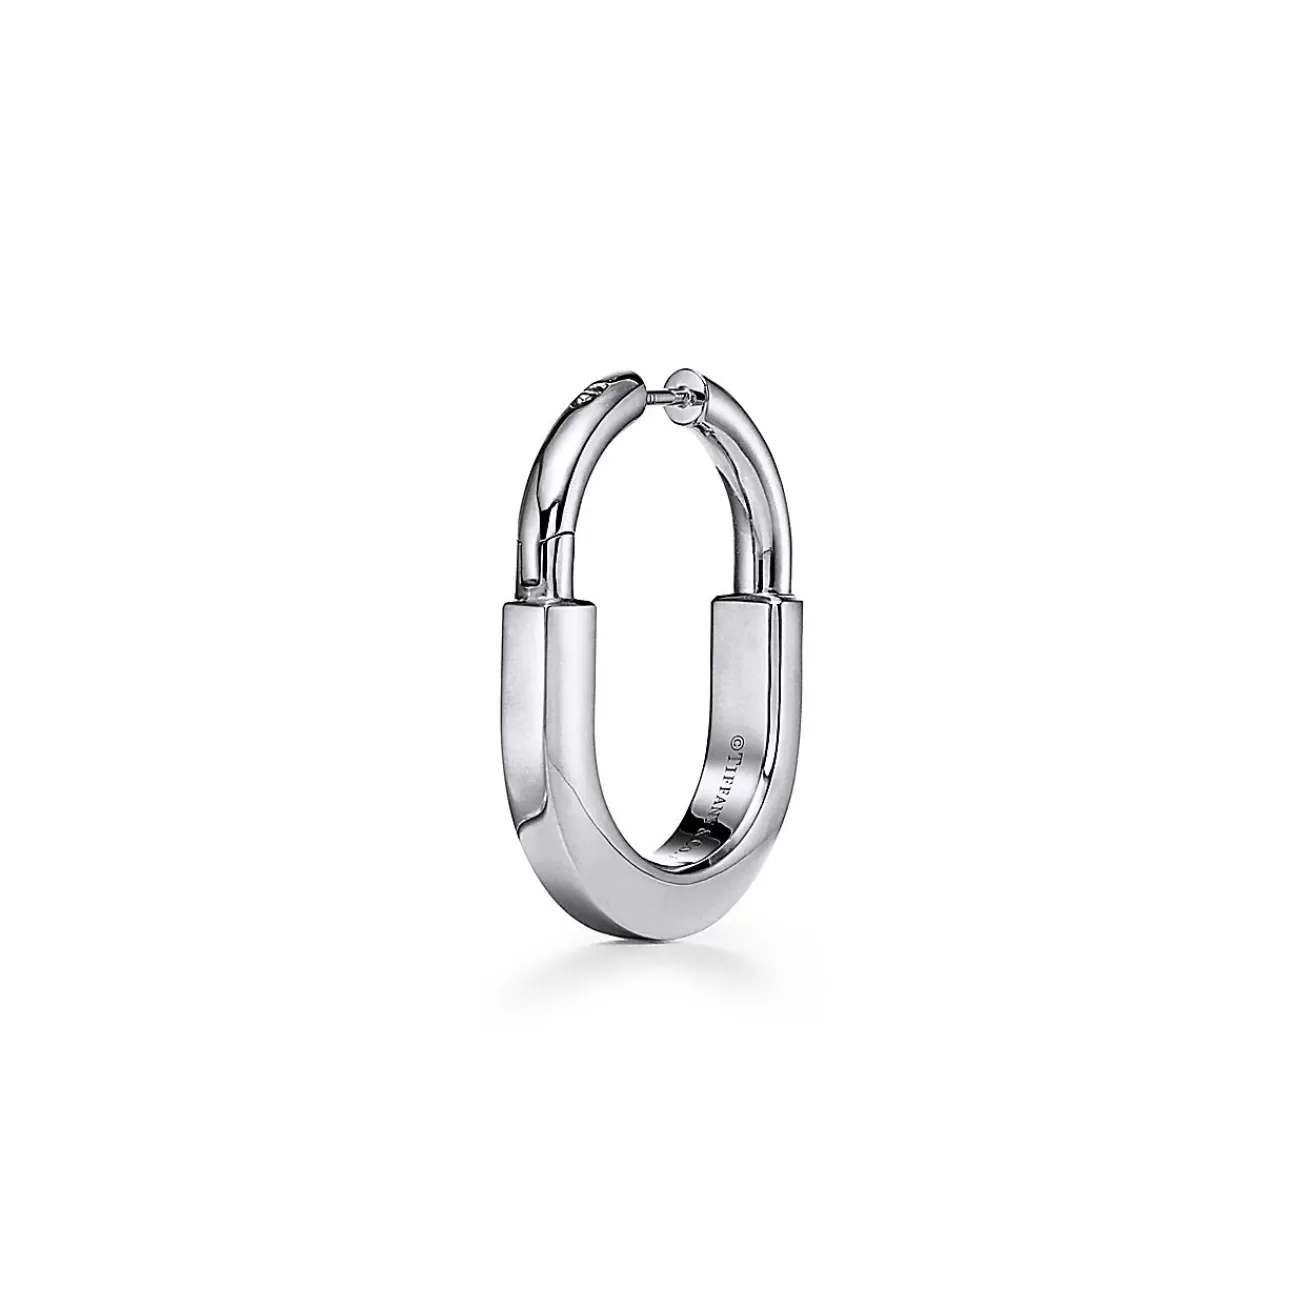 Tiffany & Co. Tiffany Lock Earrings in White Gold with Diamonds, Medium | ^ Earrings | Gifts for Her